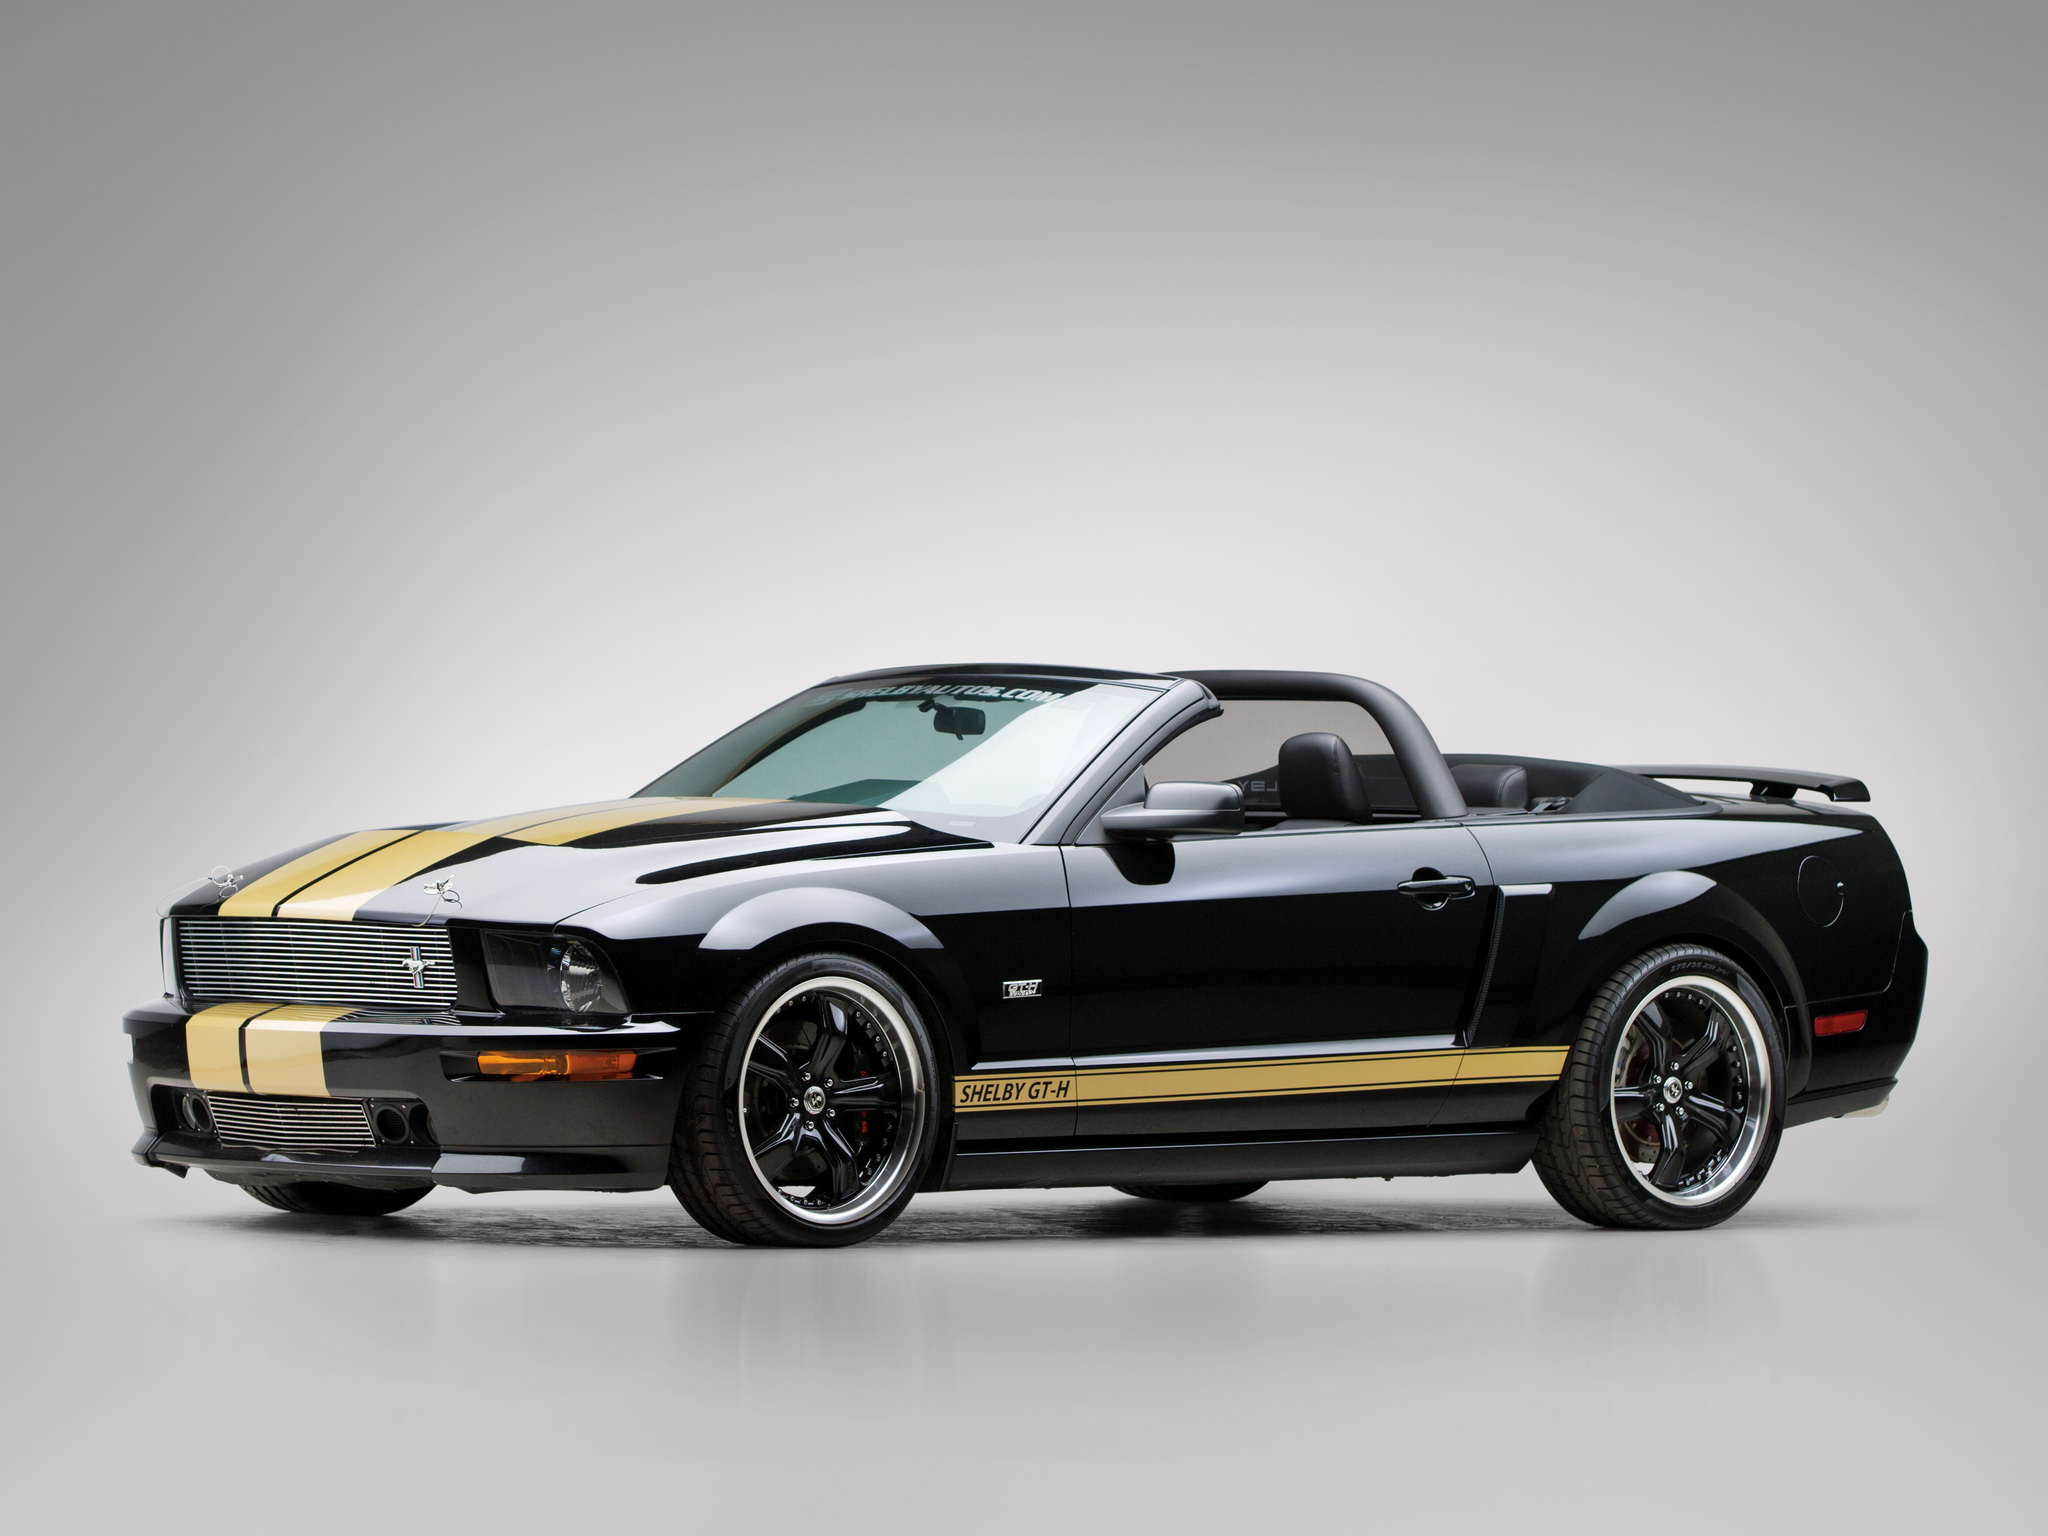 2007, Shelby, Gt h, Convertible, Ford, Mustang, Muscle Wallpaper